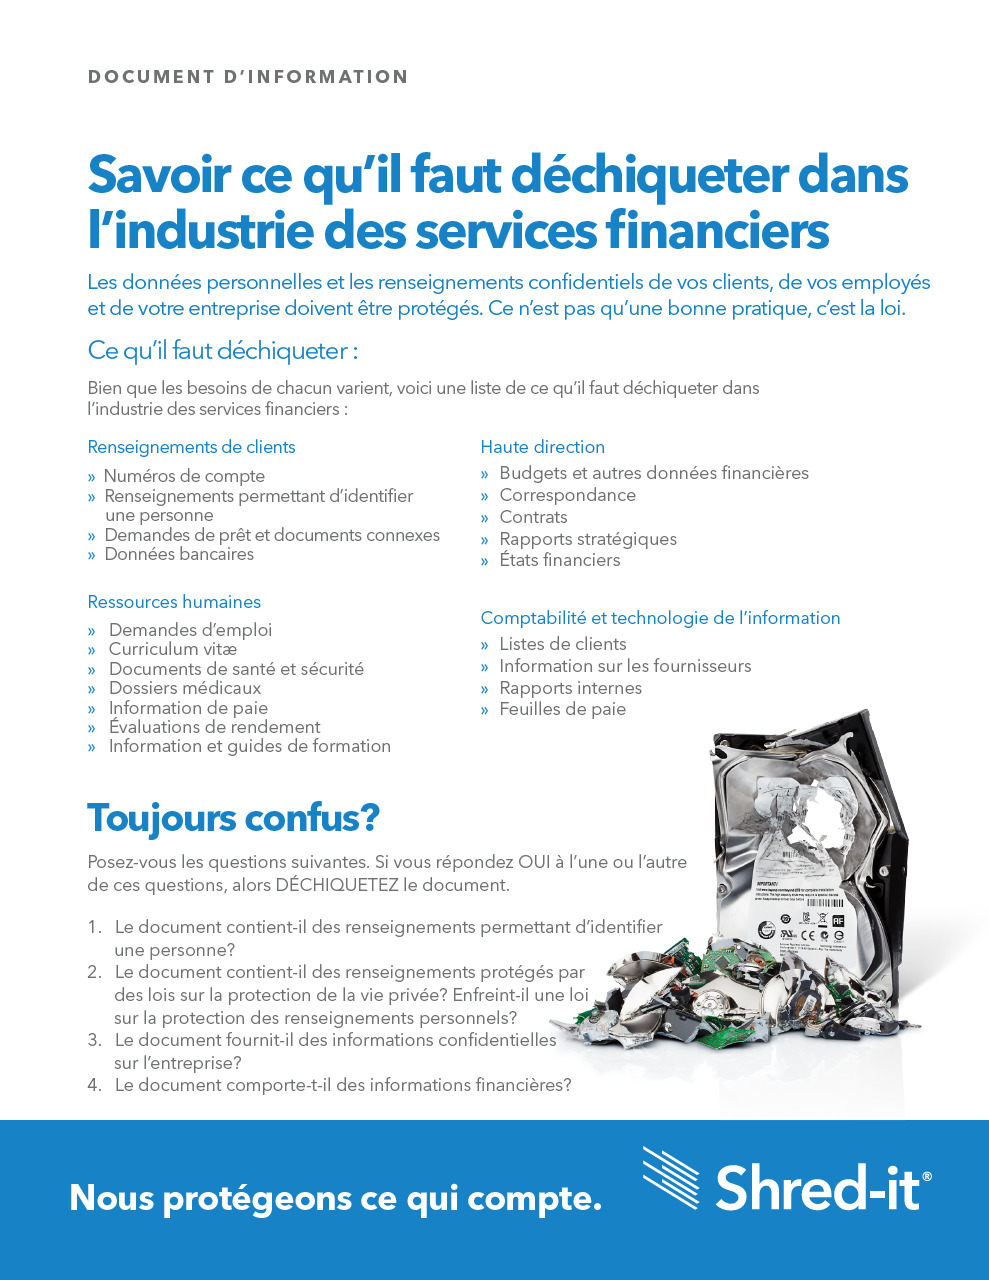 Shred-it-Knowing-What-to-Shred-Financial-Services-French.pdf